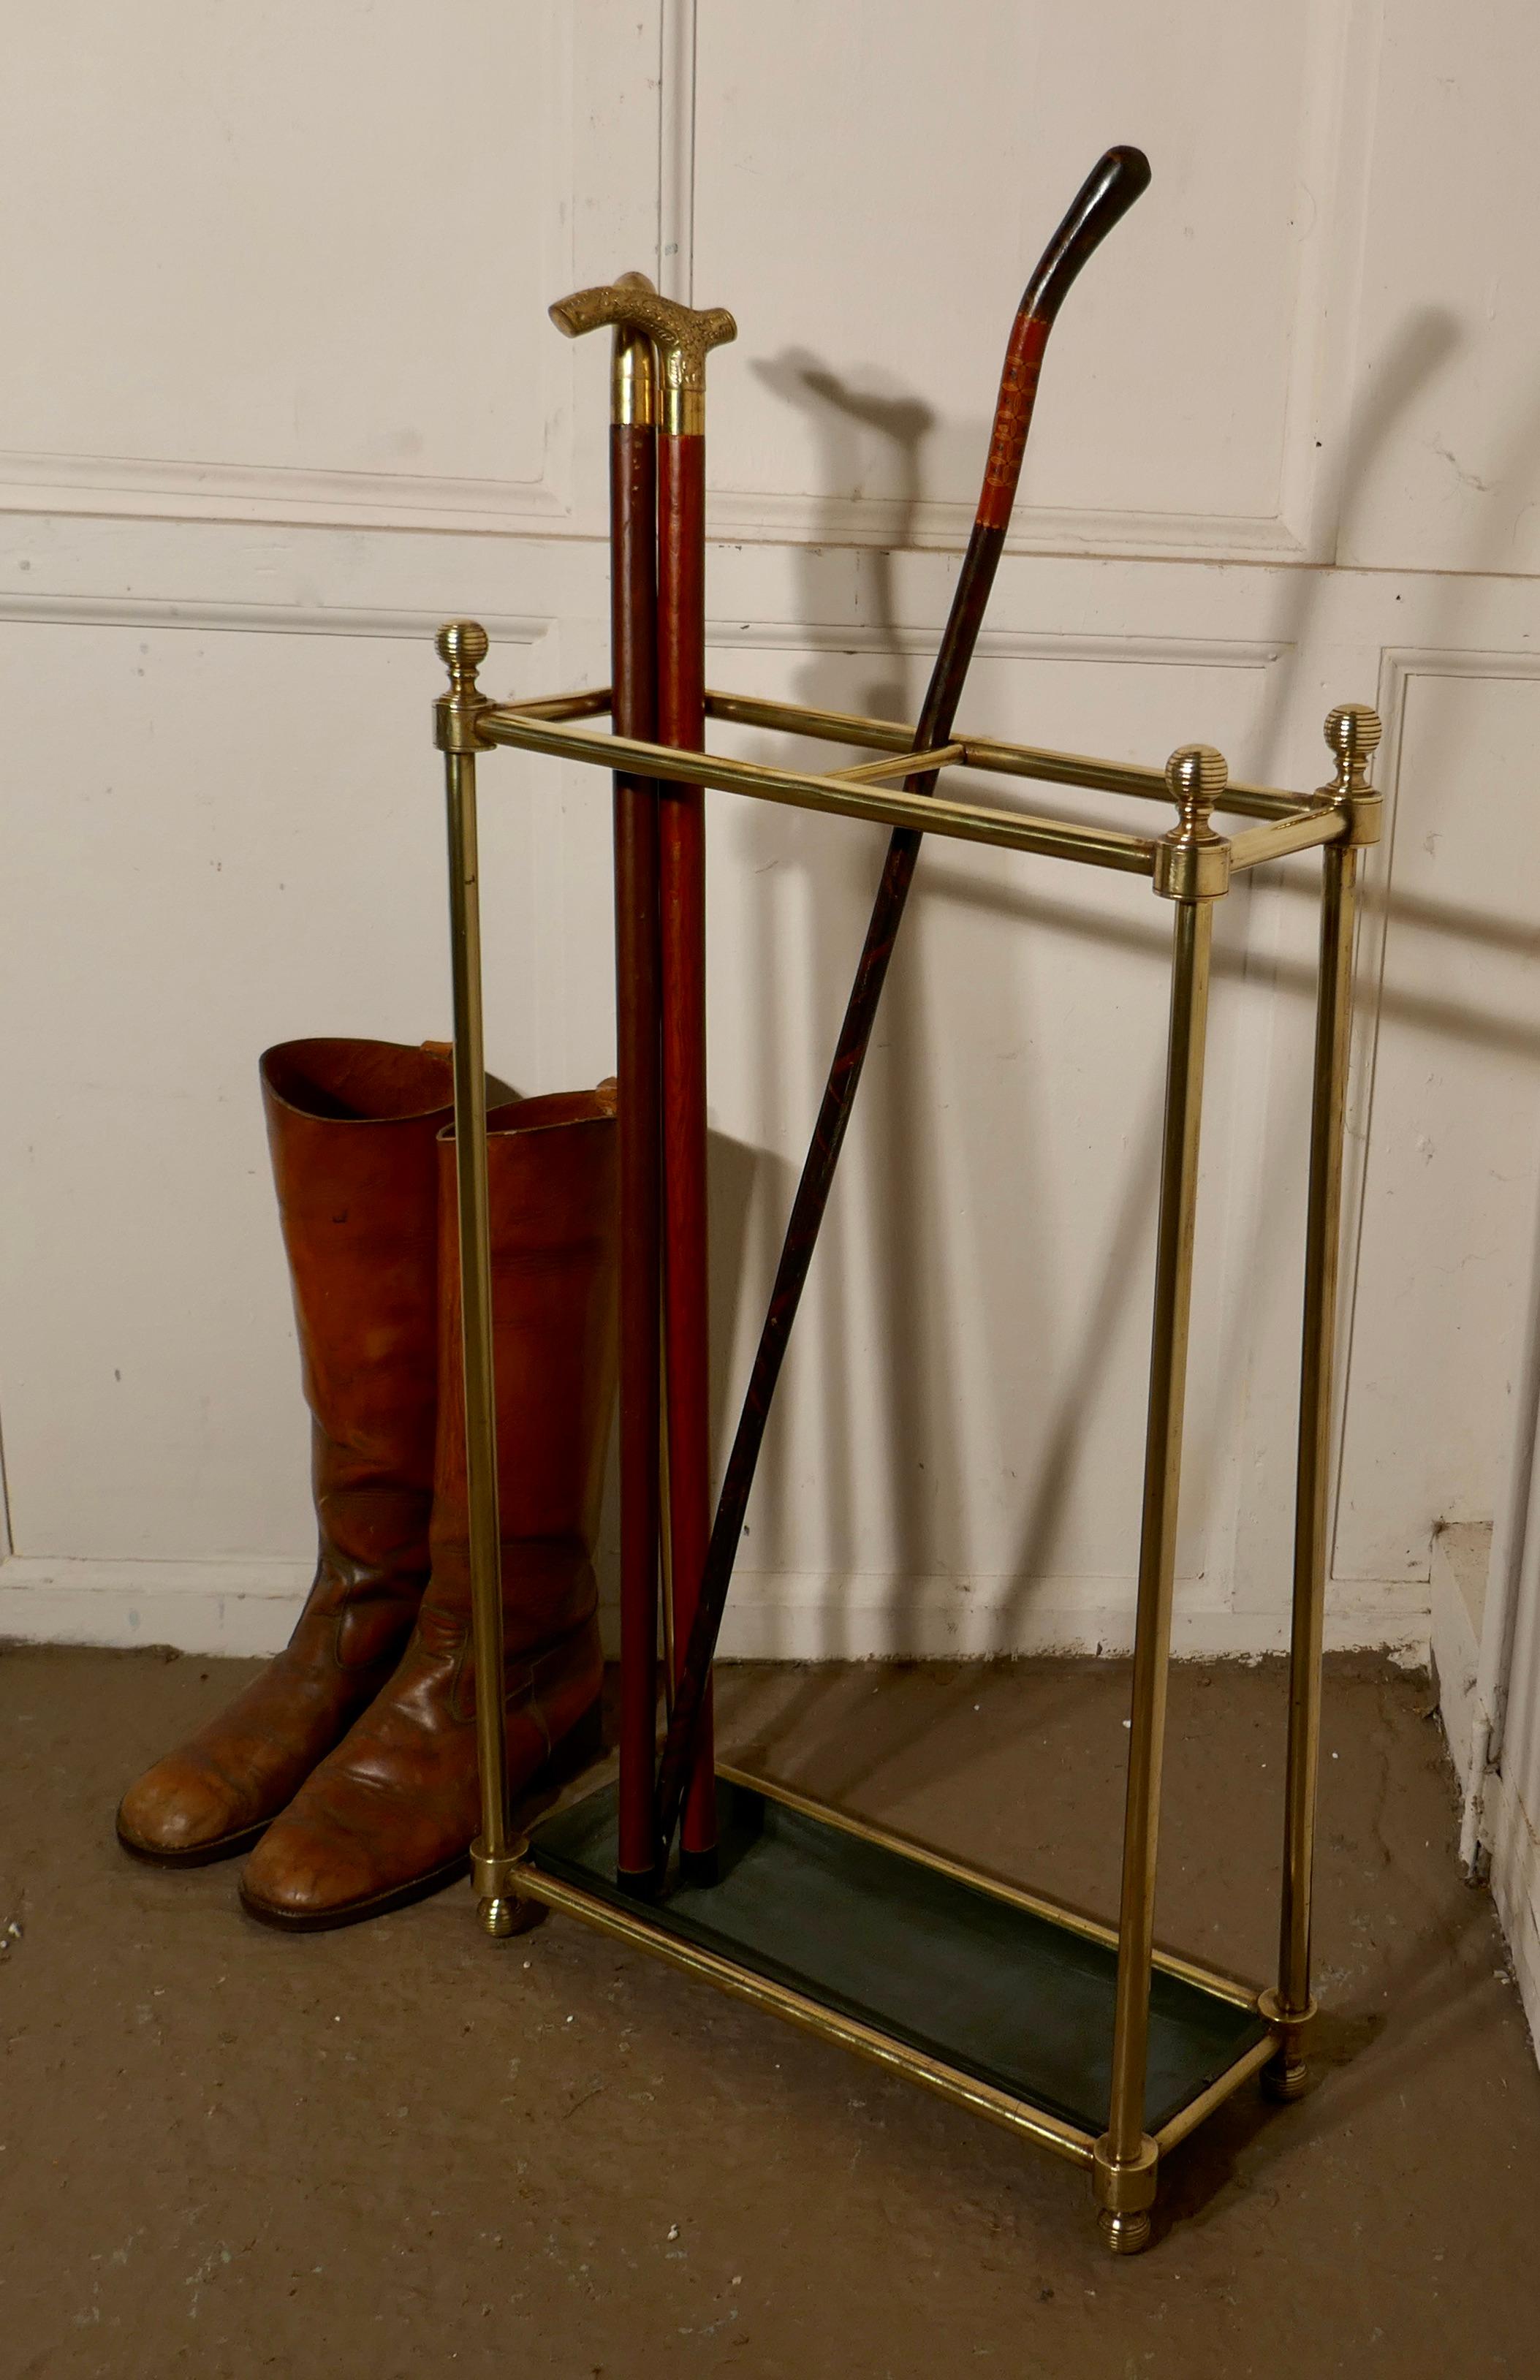 Tall Victorian brass, and iron walking stick stand or umbrella stand

A charming piece, the stand has a brass top divided into 2 large sections, to hold either walking sticks and umbrellas
The stand is in very good condition and taller then